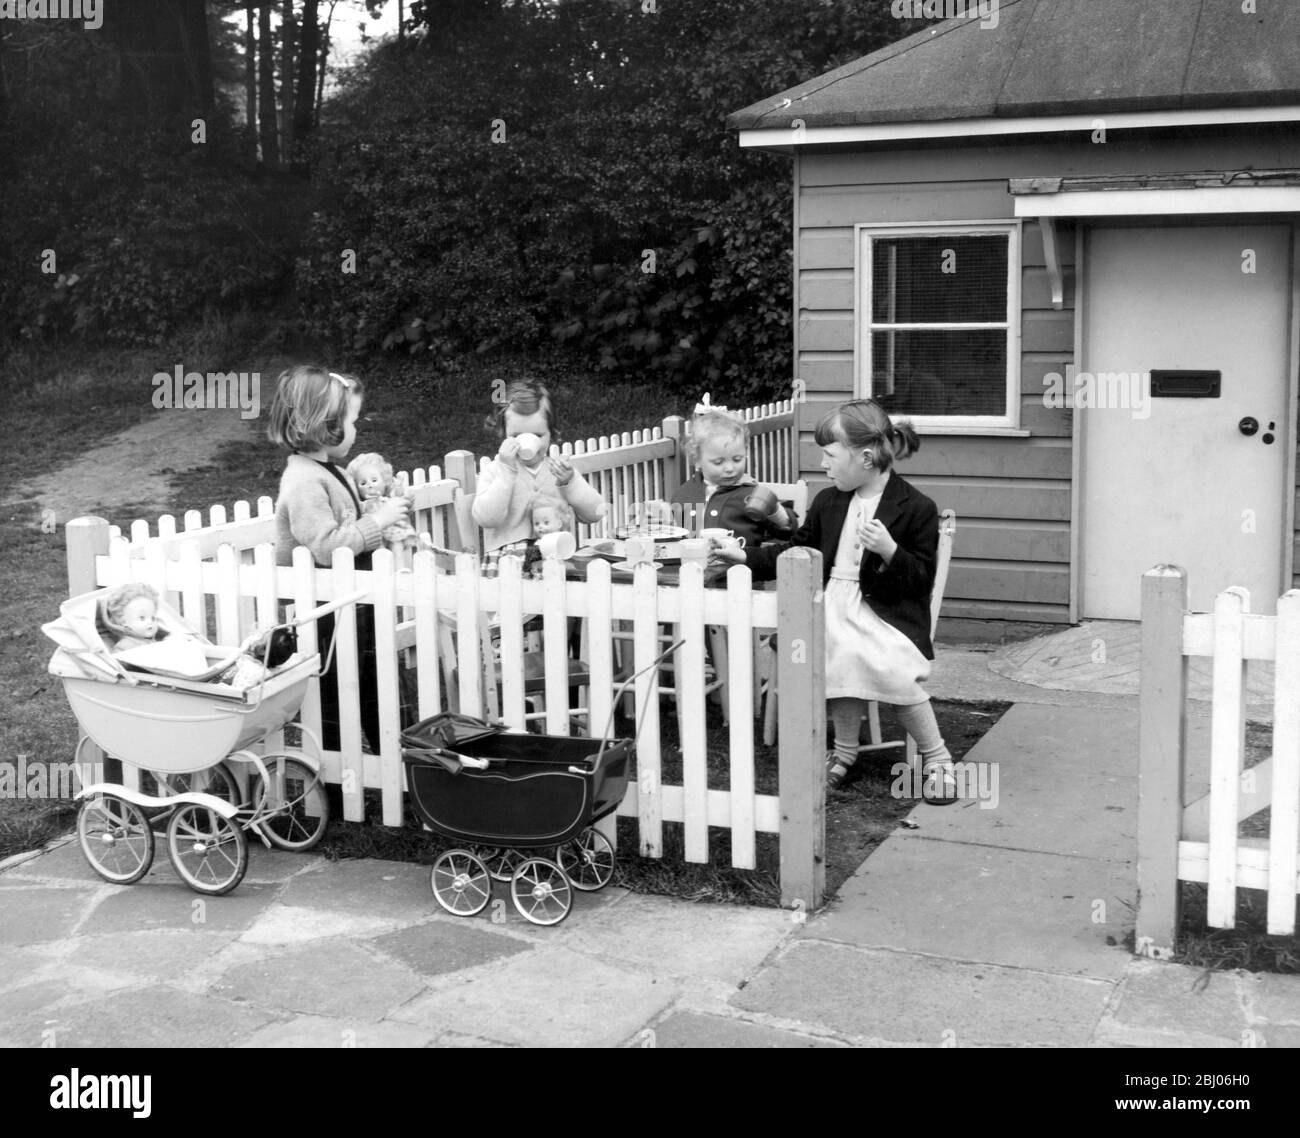 (L to R) Caryl Hastings, aged 5 Sally Hastins, aged 3, Sarah Hook, aged 2, Lynne Whitehead, aged 4, enjoying an afternoon tea party at the Wendy House in the Totteridge Park Recreation Ground, North London. - 5 June 1962 Stock Photo